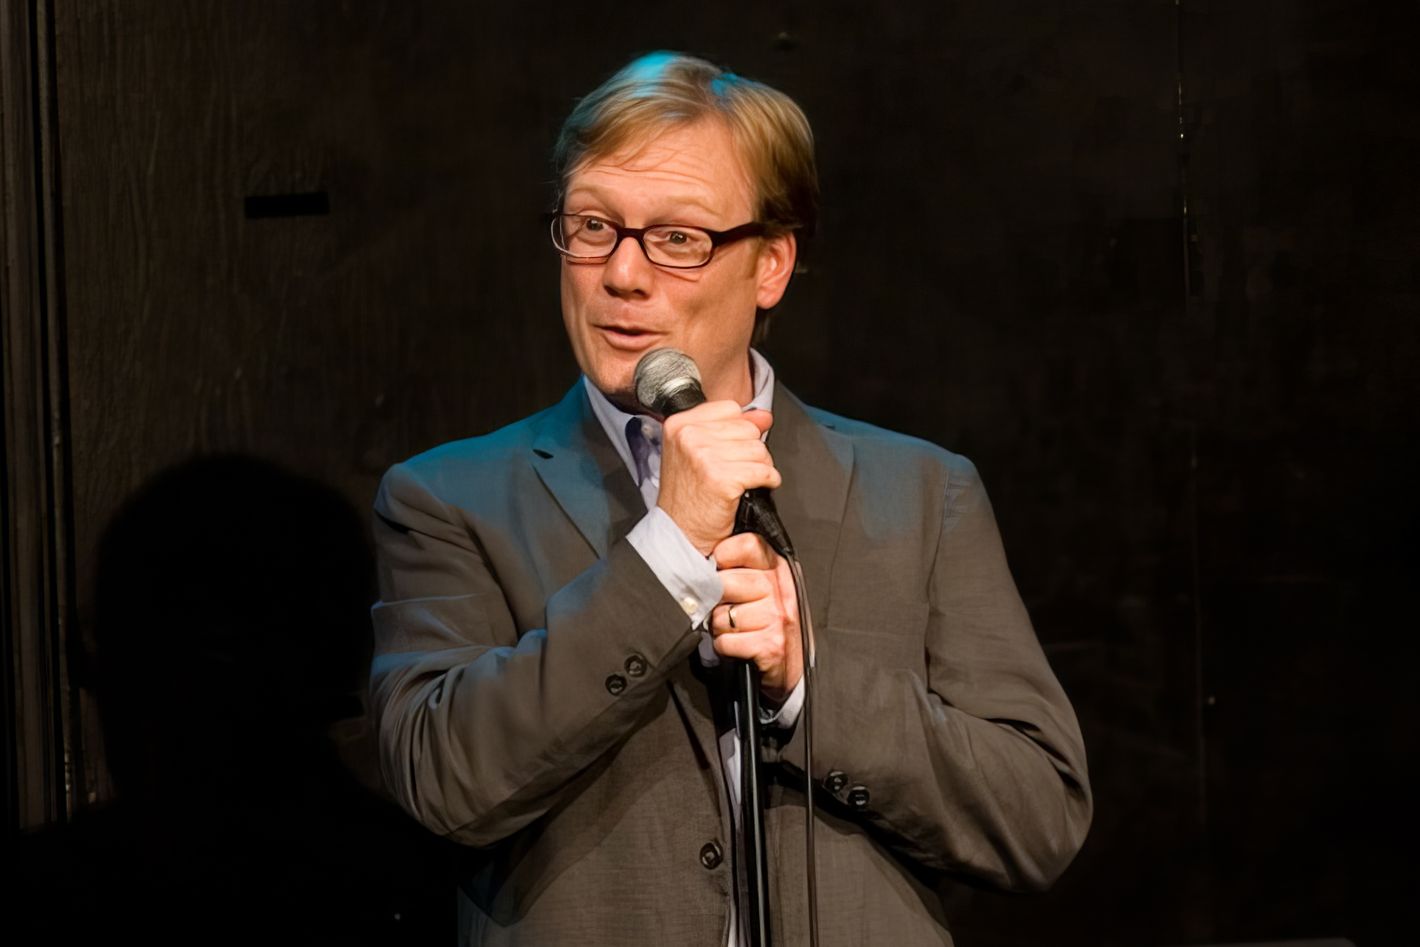 Andy Daly Mines Art From Hack-Comedy Criticism